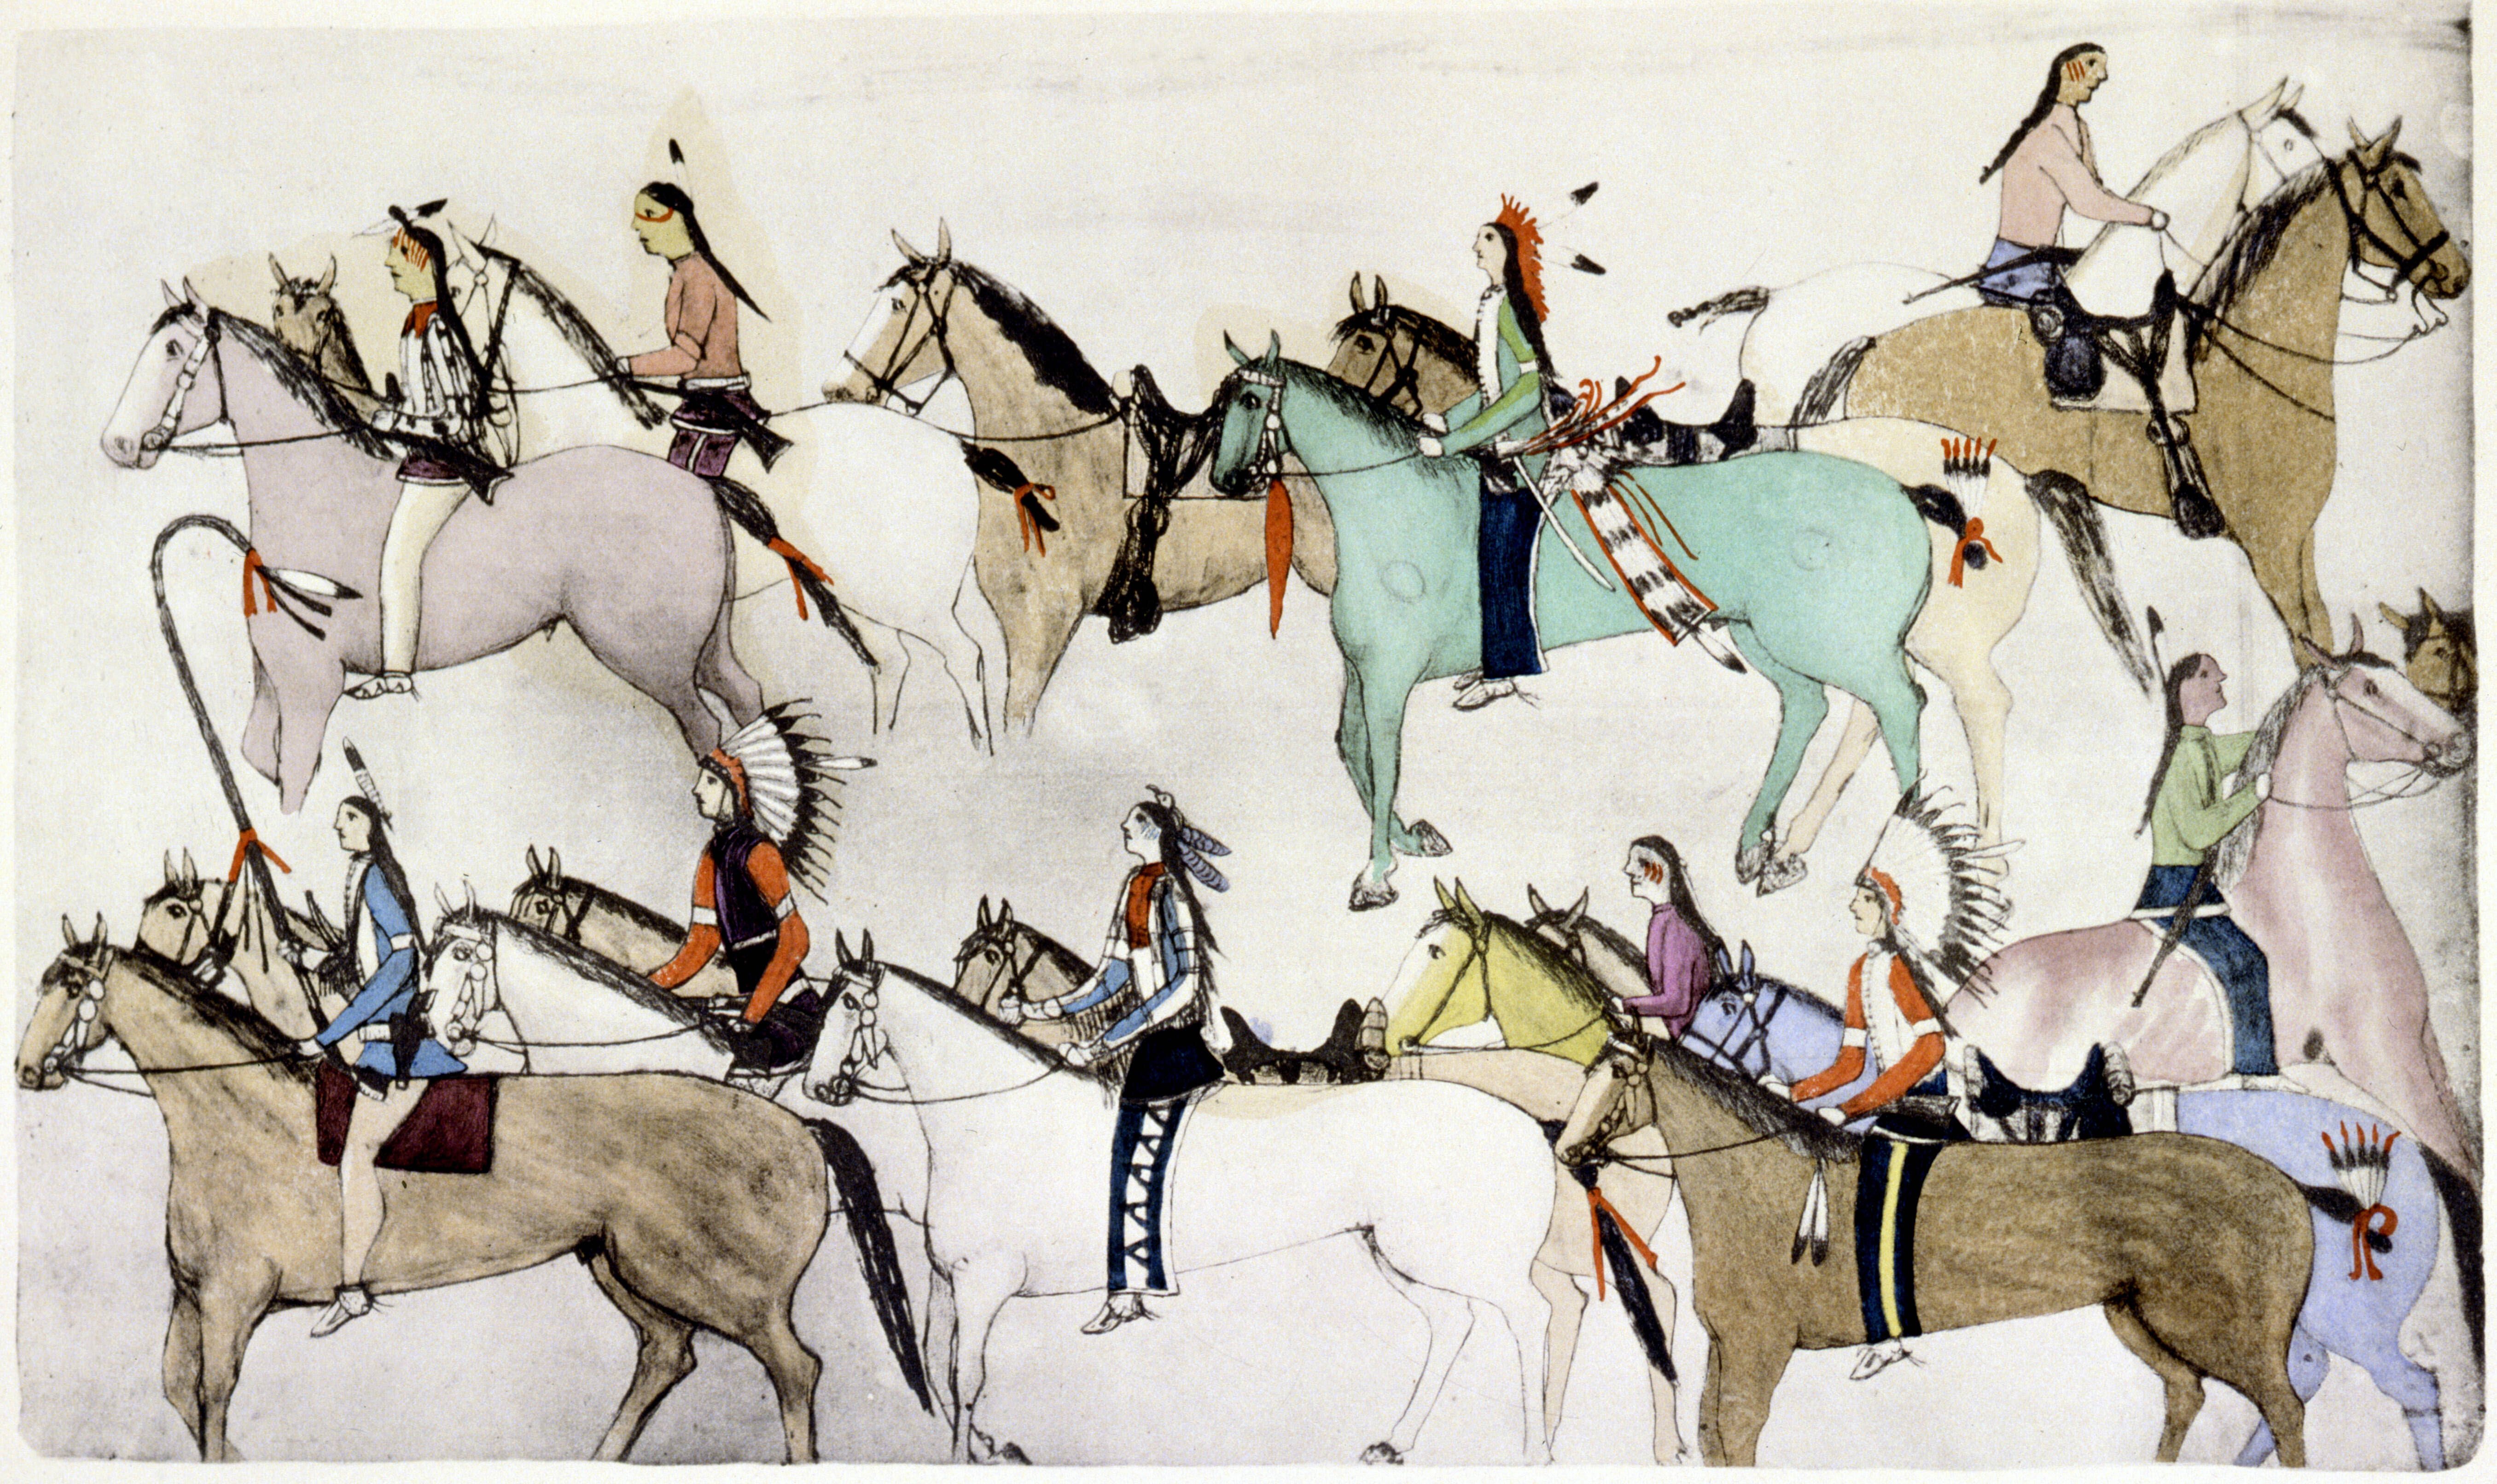 'End of the Battle', a ledger art pictogram depicting Sioux warriors leading away captured horses after defeating Custer's troops at 'Custer's Last Stand', otherwise known as the Battle of Little Big Horn, 25-26 June 1876. Artwork circa 1900 by Oglala Lakota artist Amos Bad Heart Bull. (Photo by Art Media/Print Collector/Getty Images)